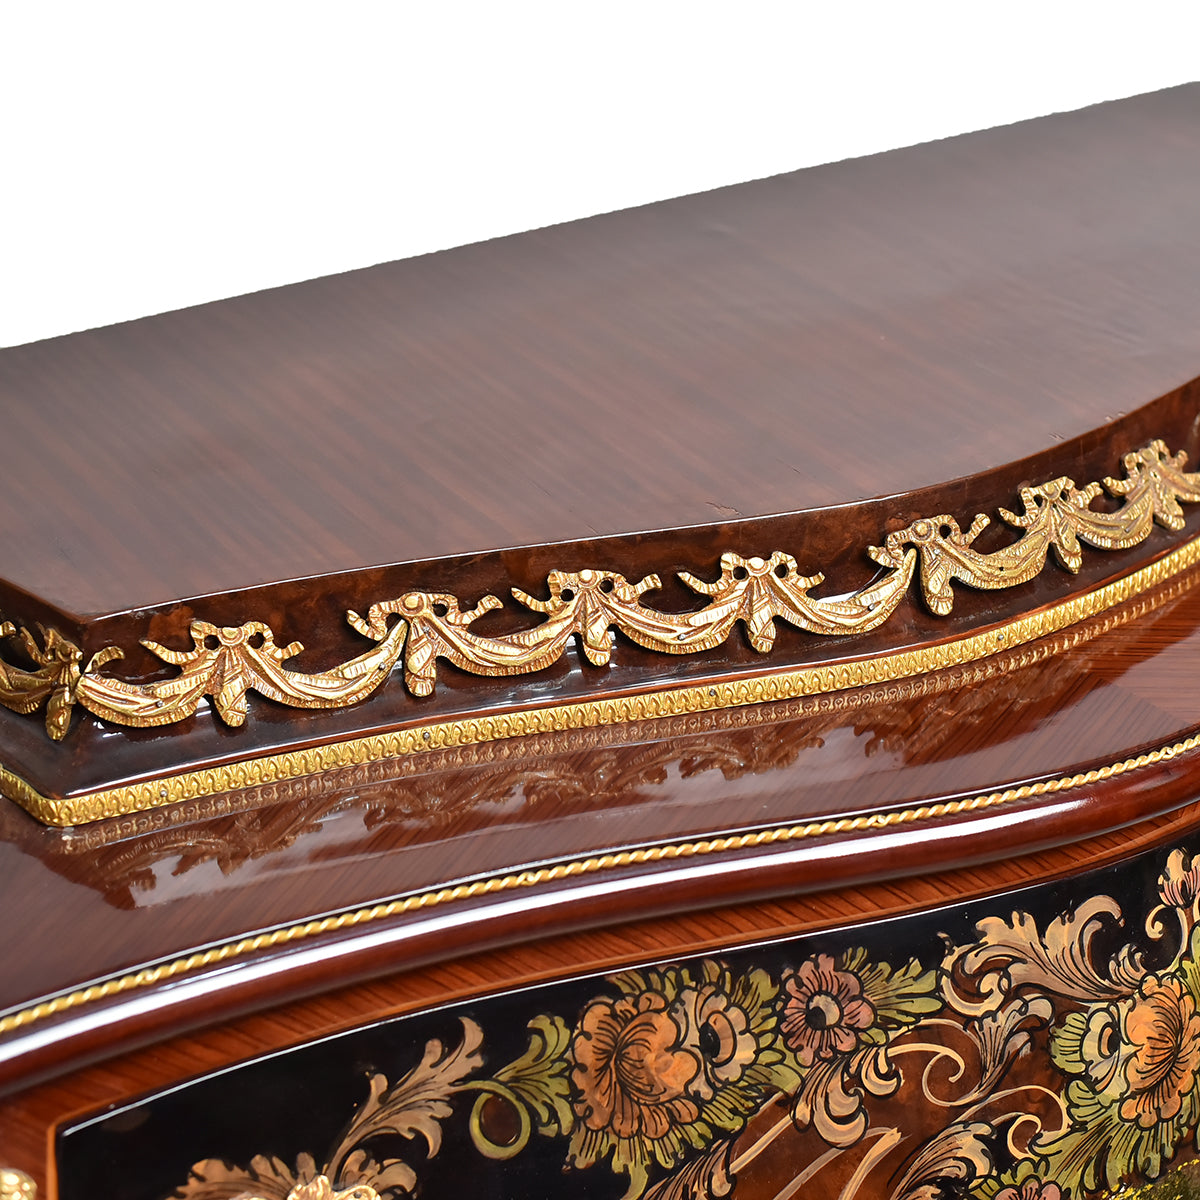 Hand painted Louis XIV chest-drawer